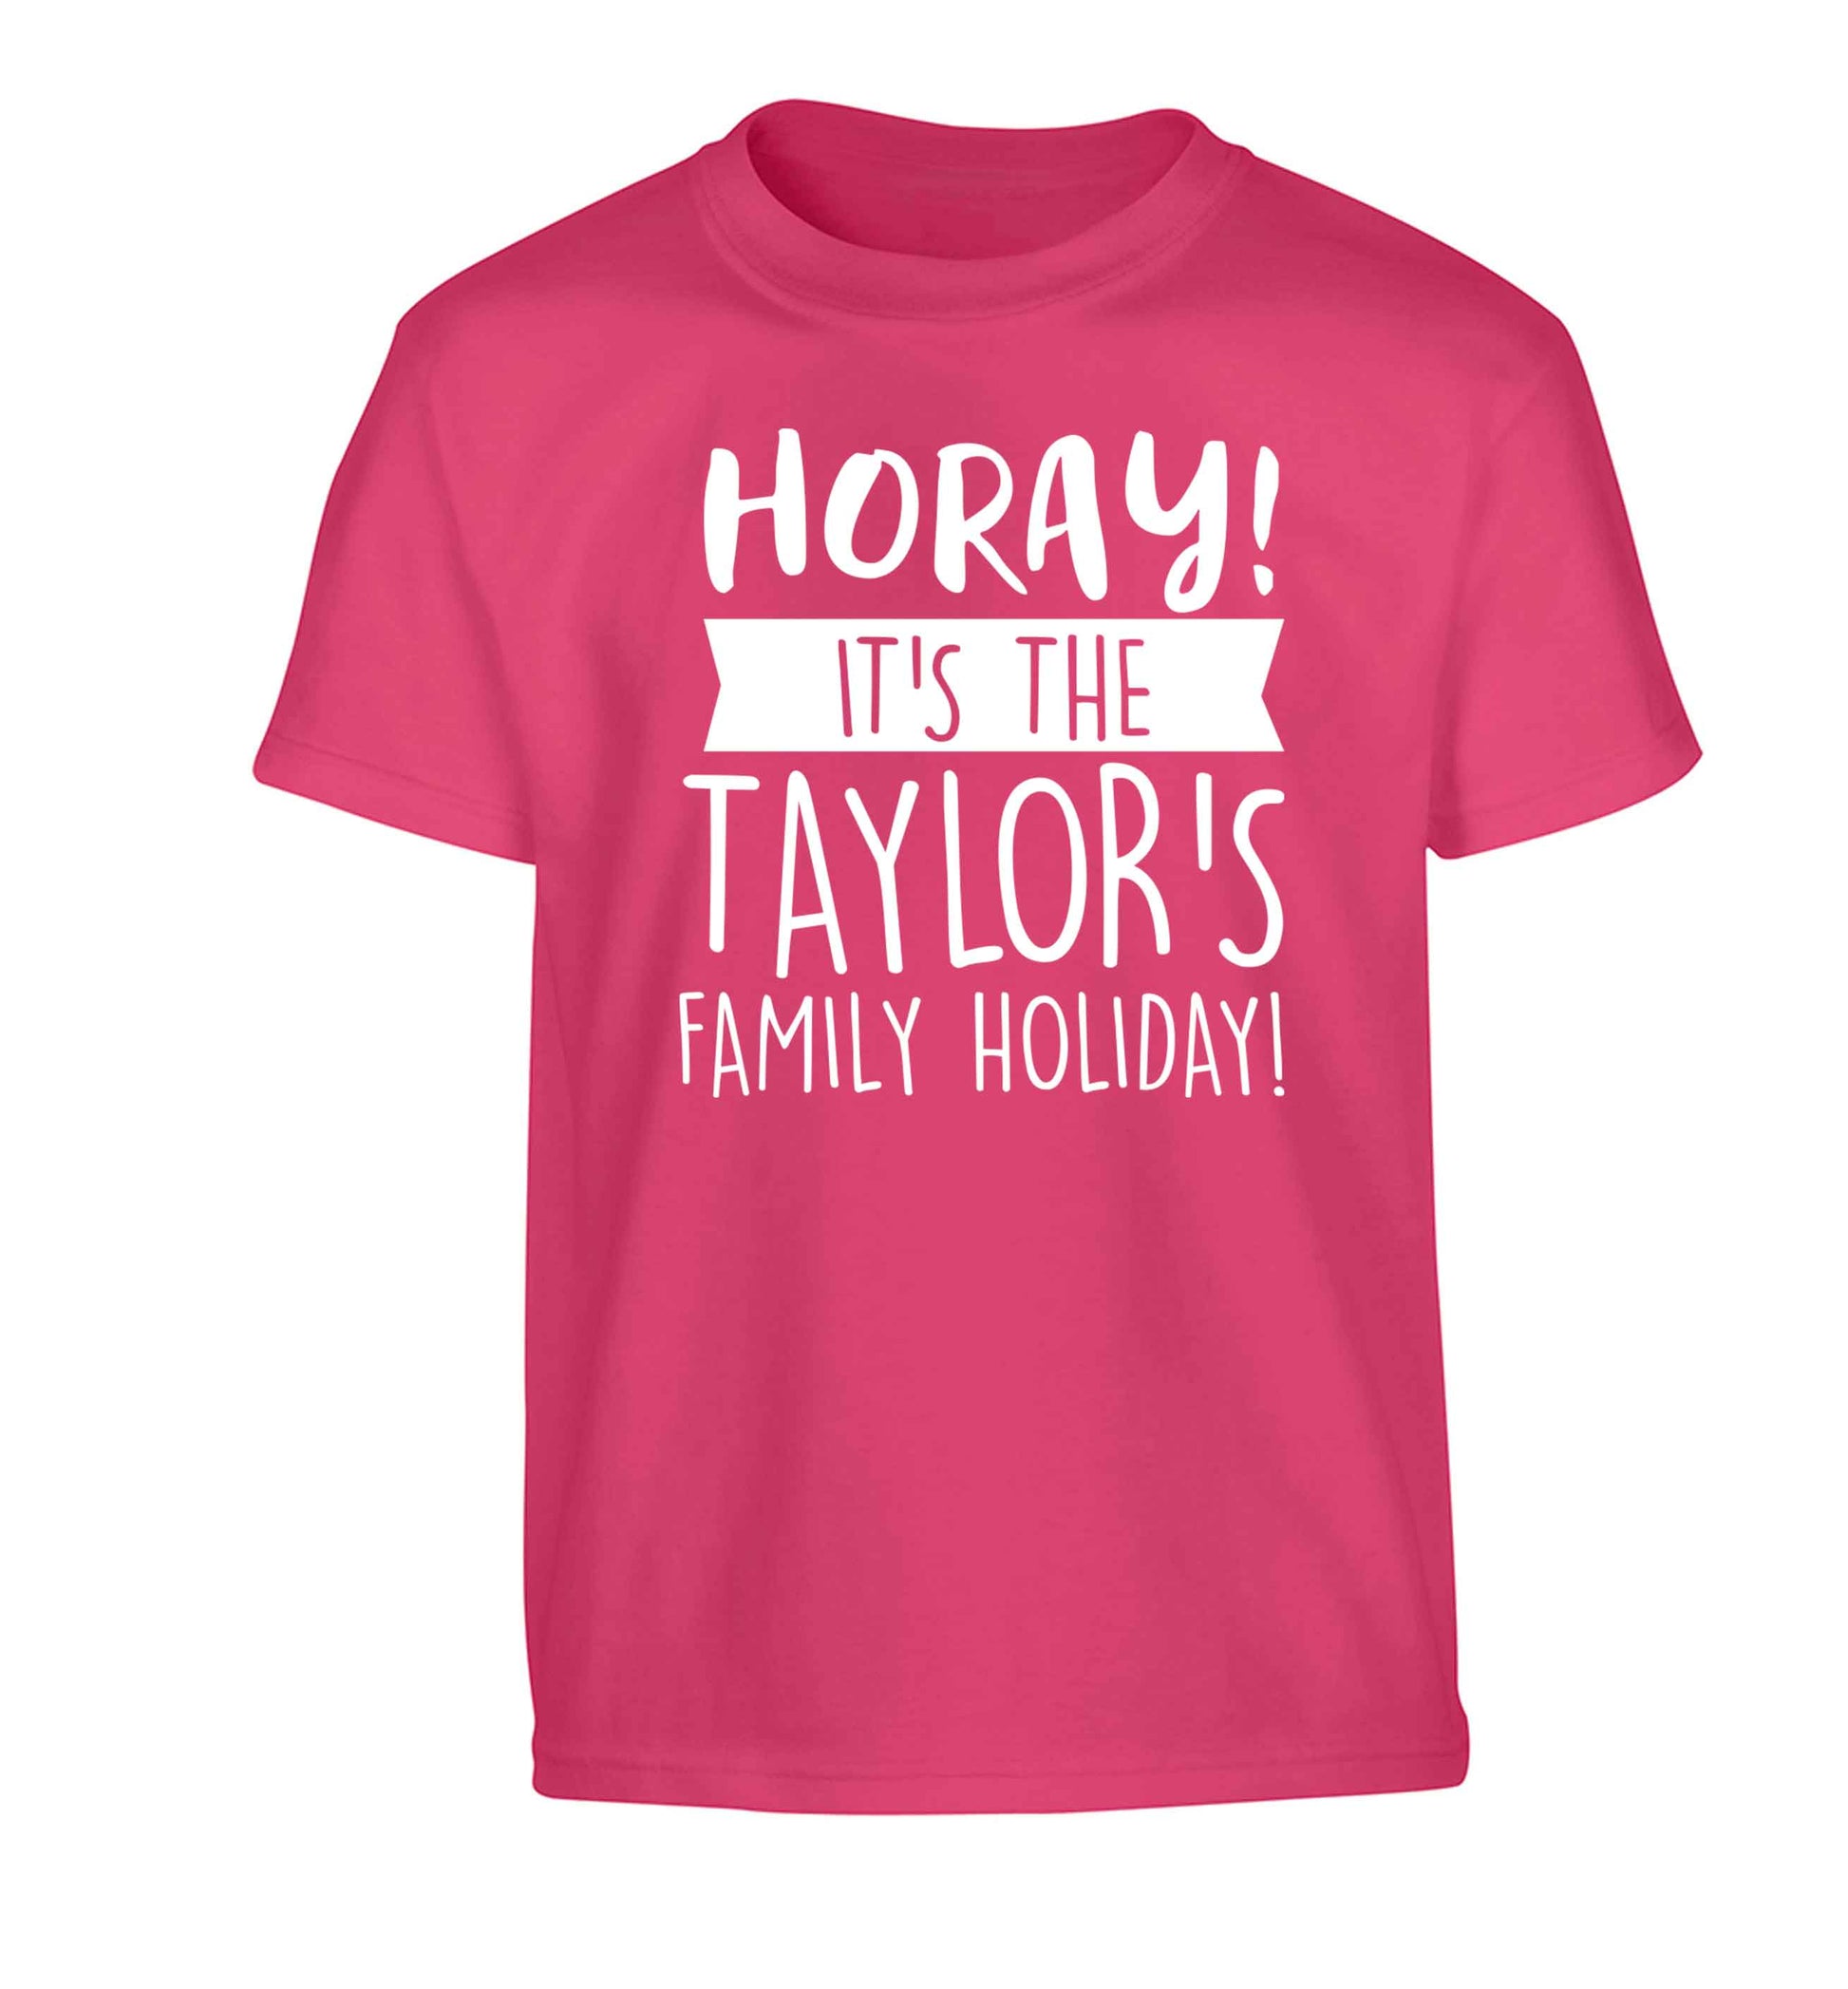 Horay it's the Taylor's family holiday! personalised item Children's pink Tshirt 12-13 Years